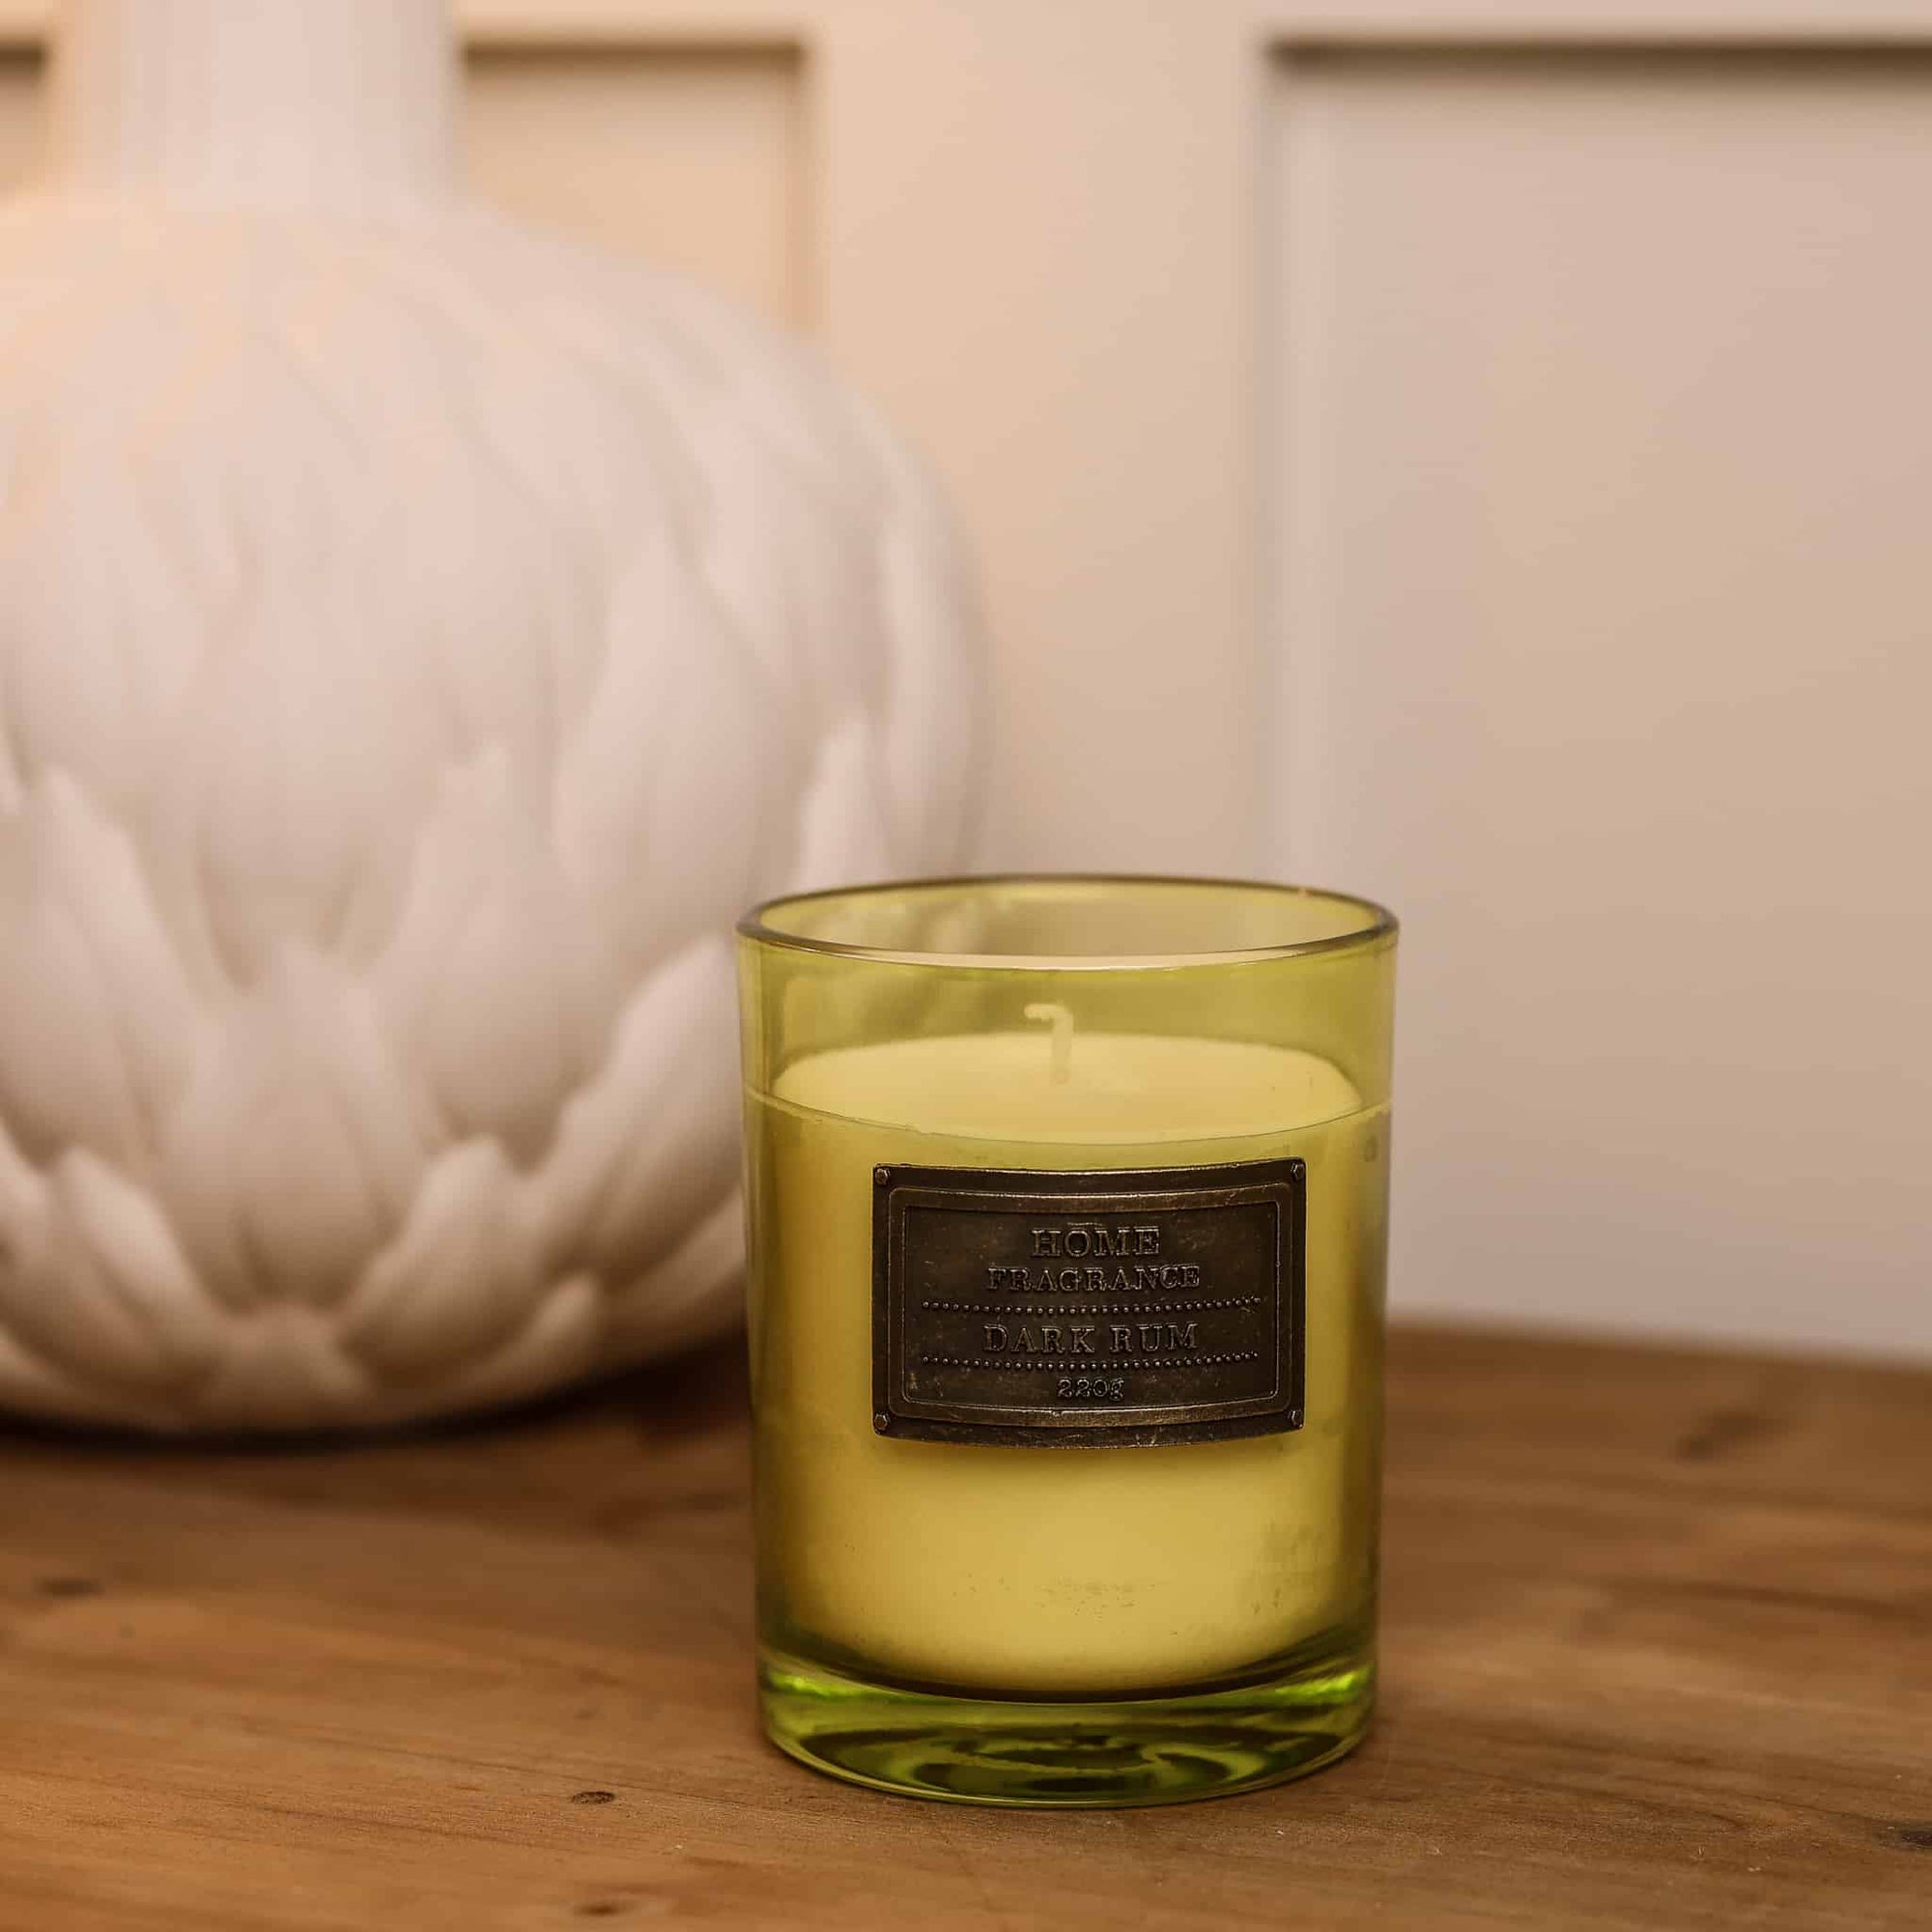 Dark Rum and Lime Candle on wooden console styled with white vase.